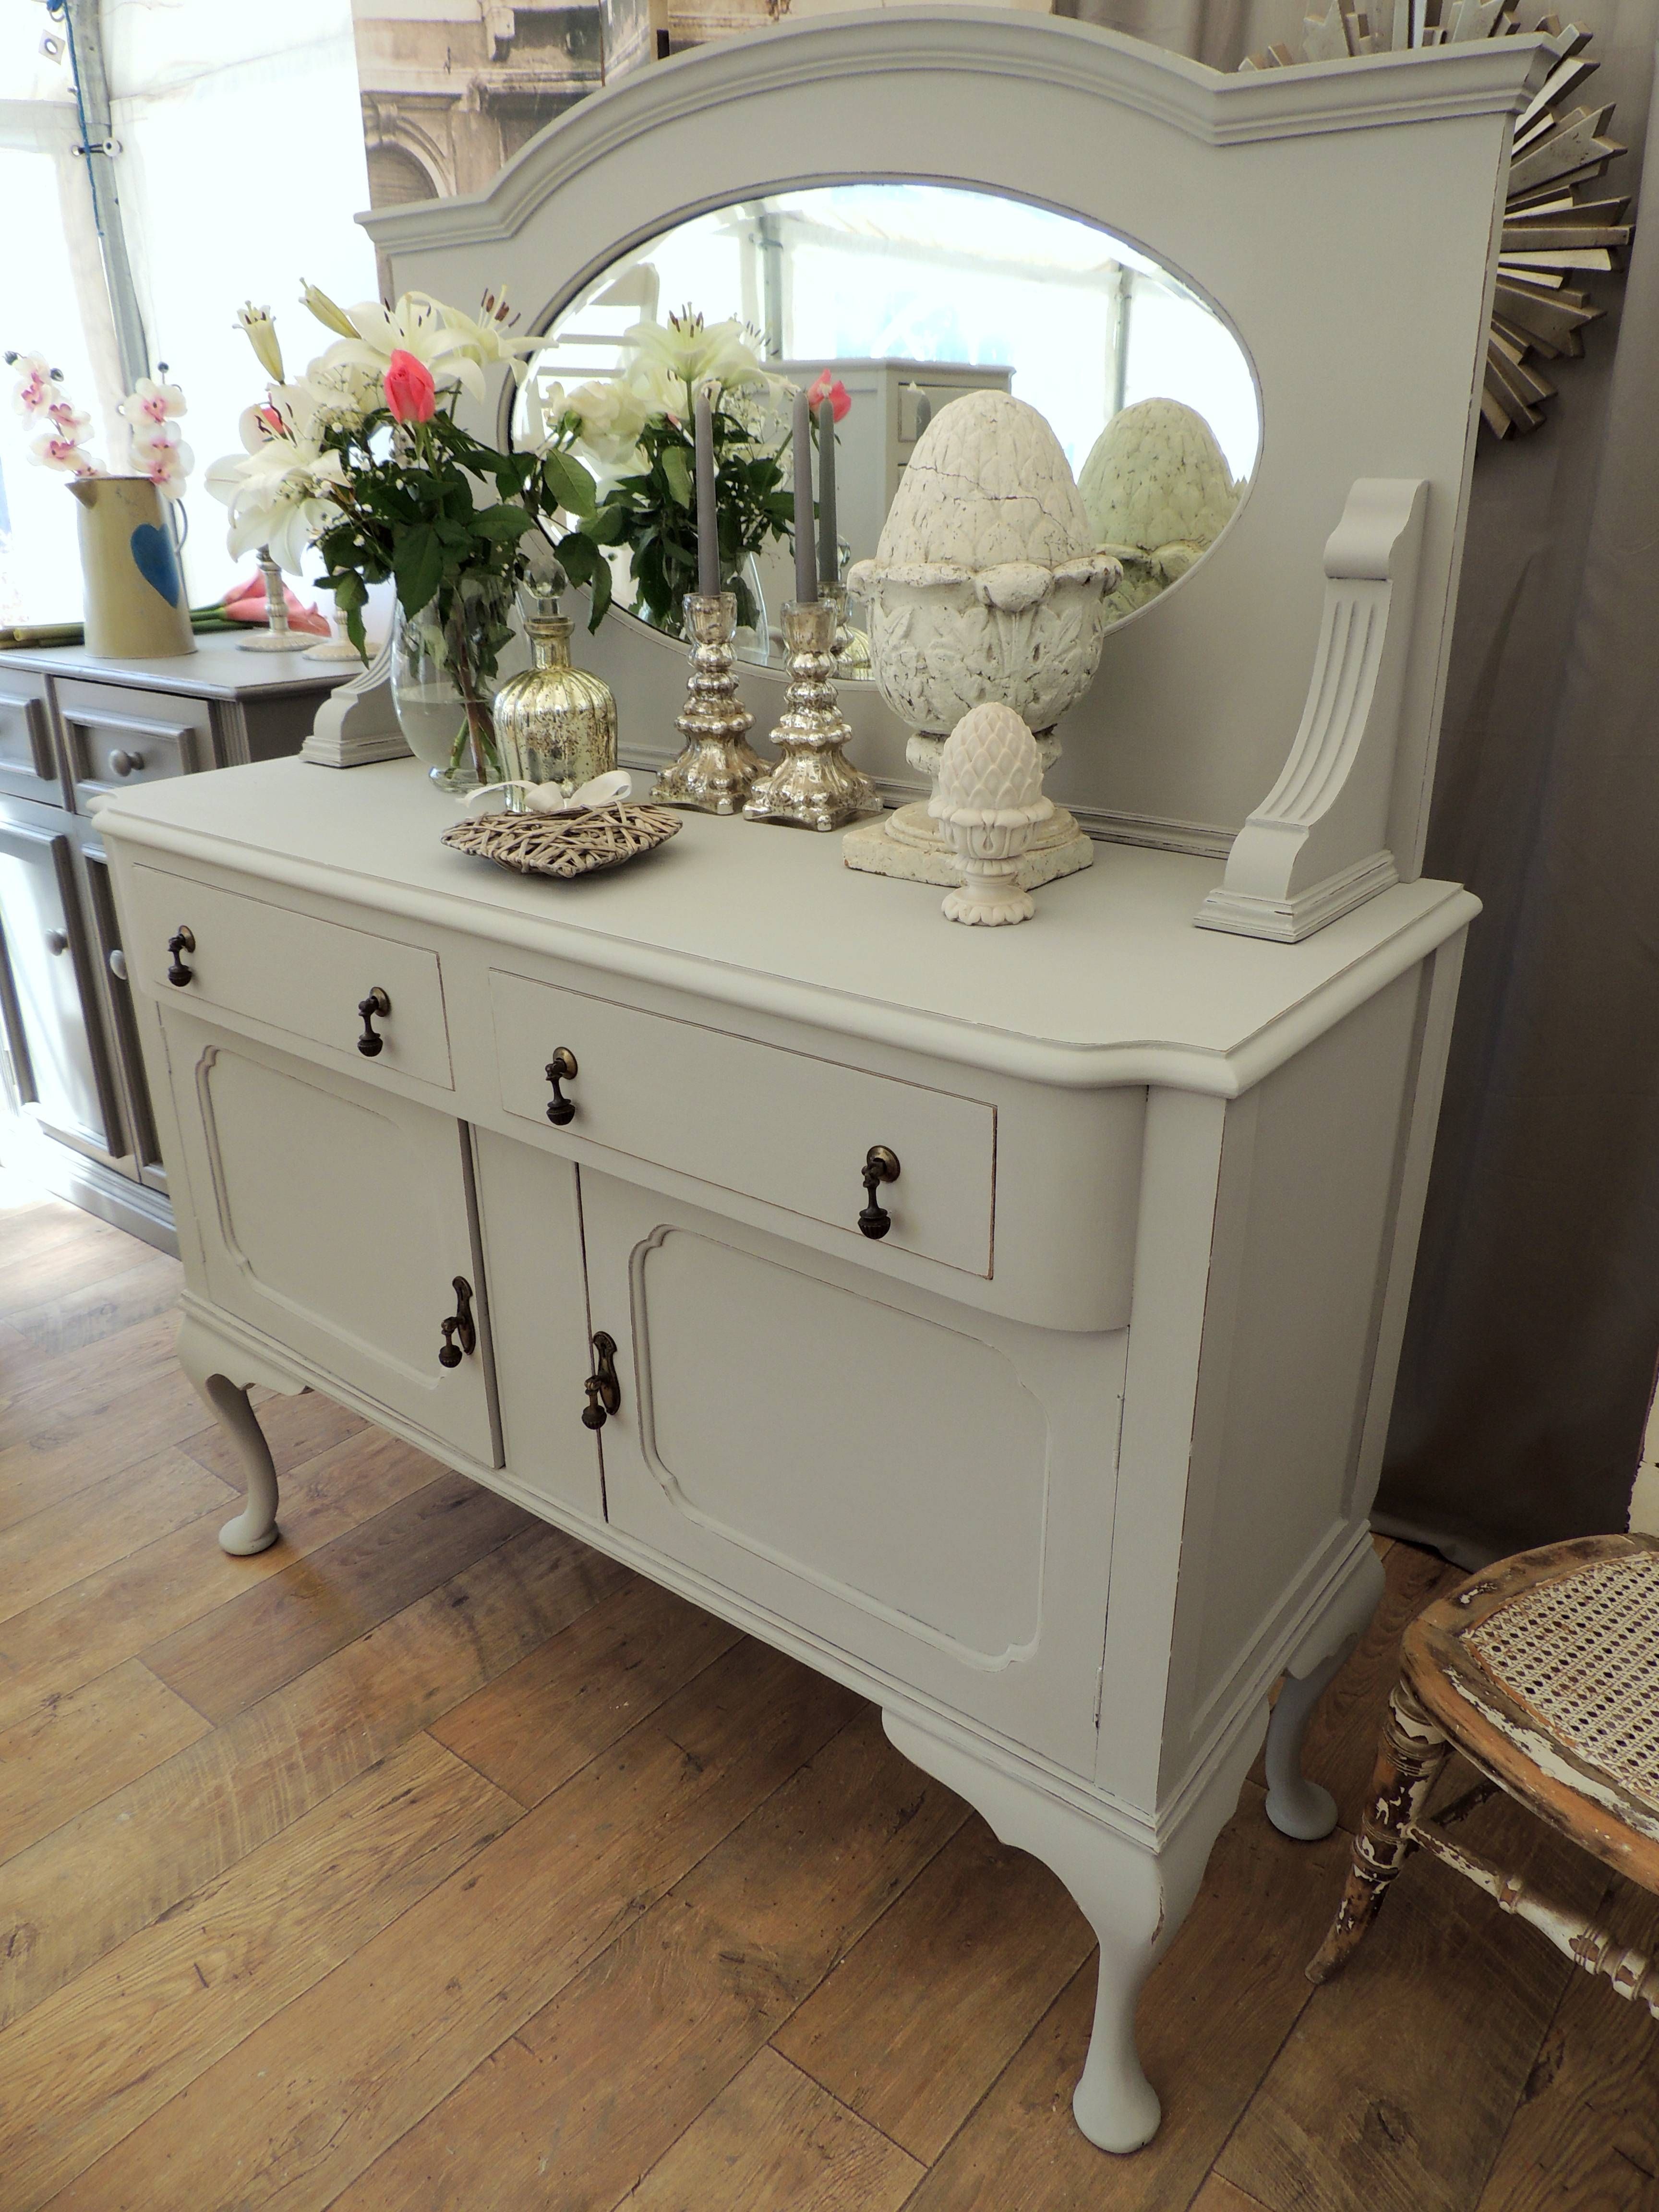 Shabby Chic Edwardian Sideboard With Mirror – Eclectivo London For Best And Newest Shabby Chic Sideboards (View 11 of 15)